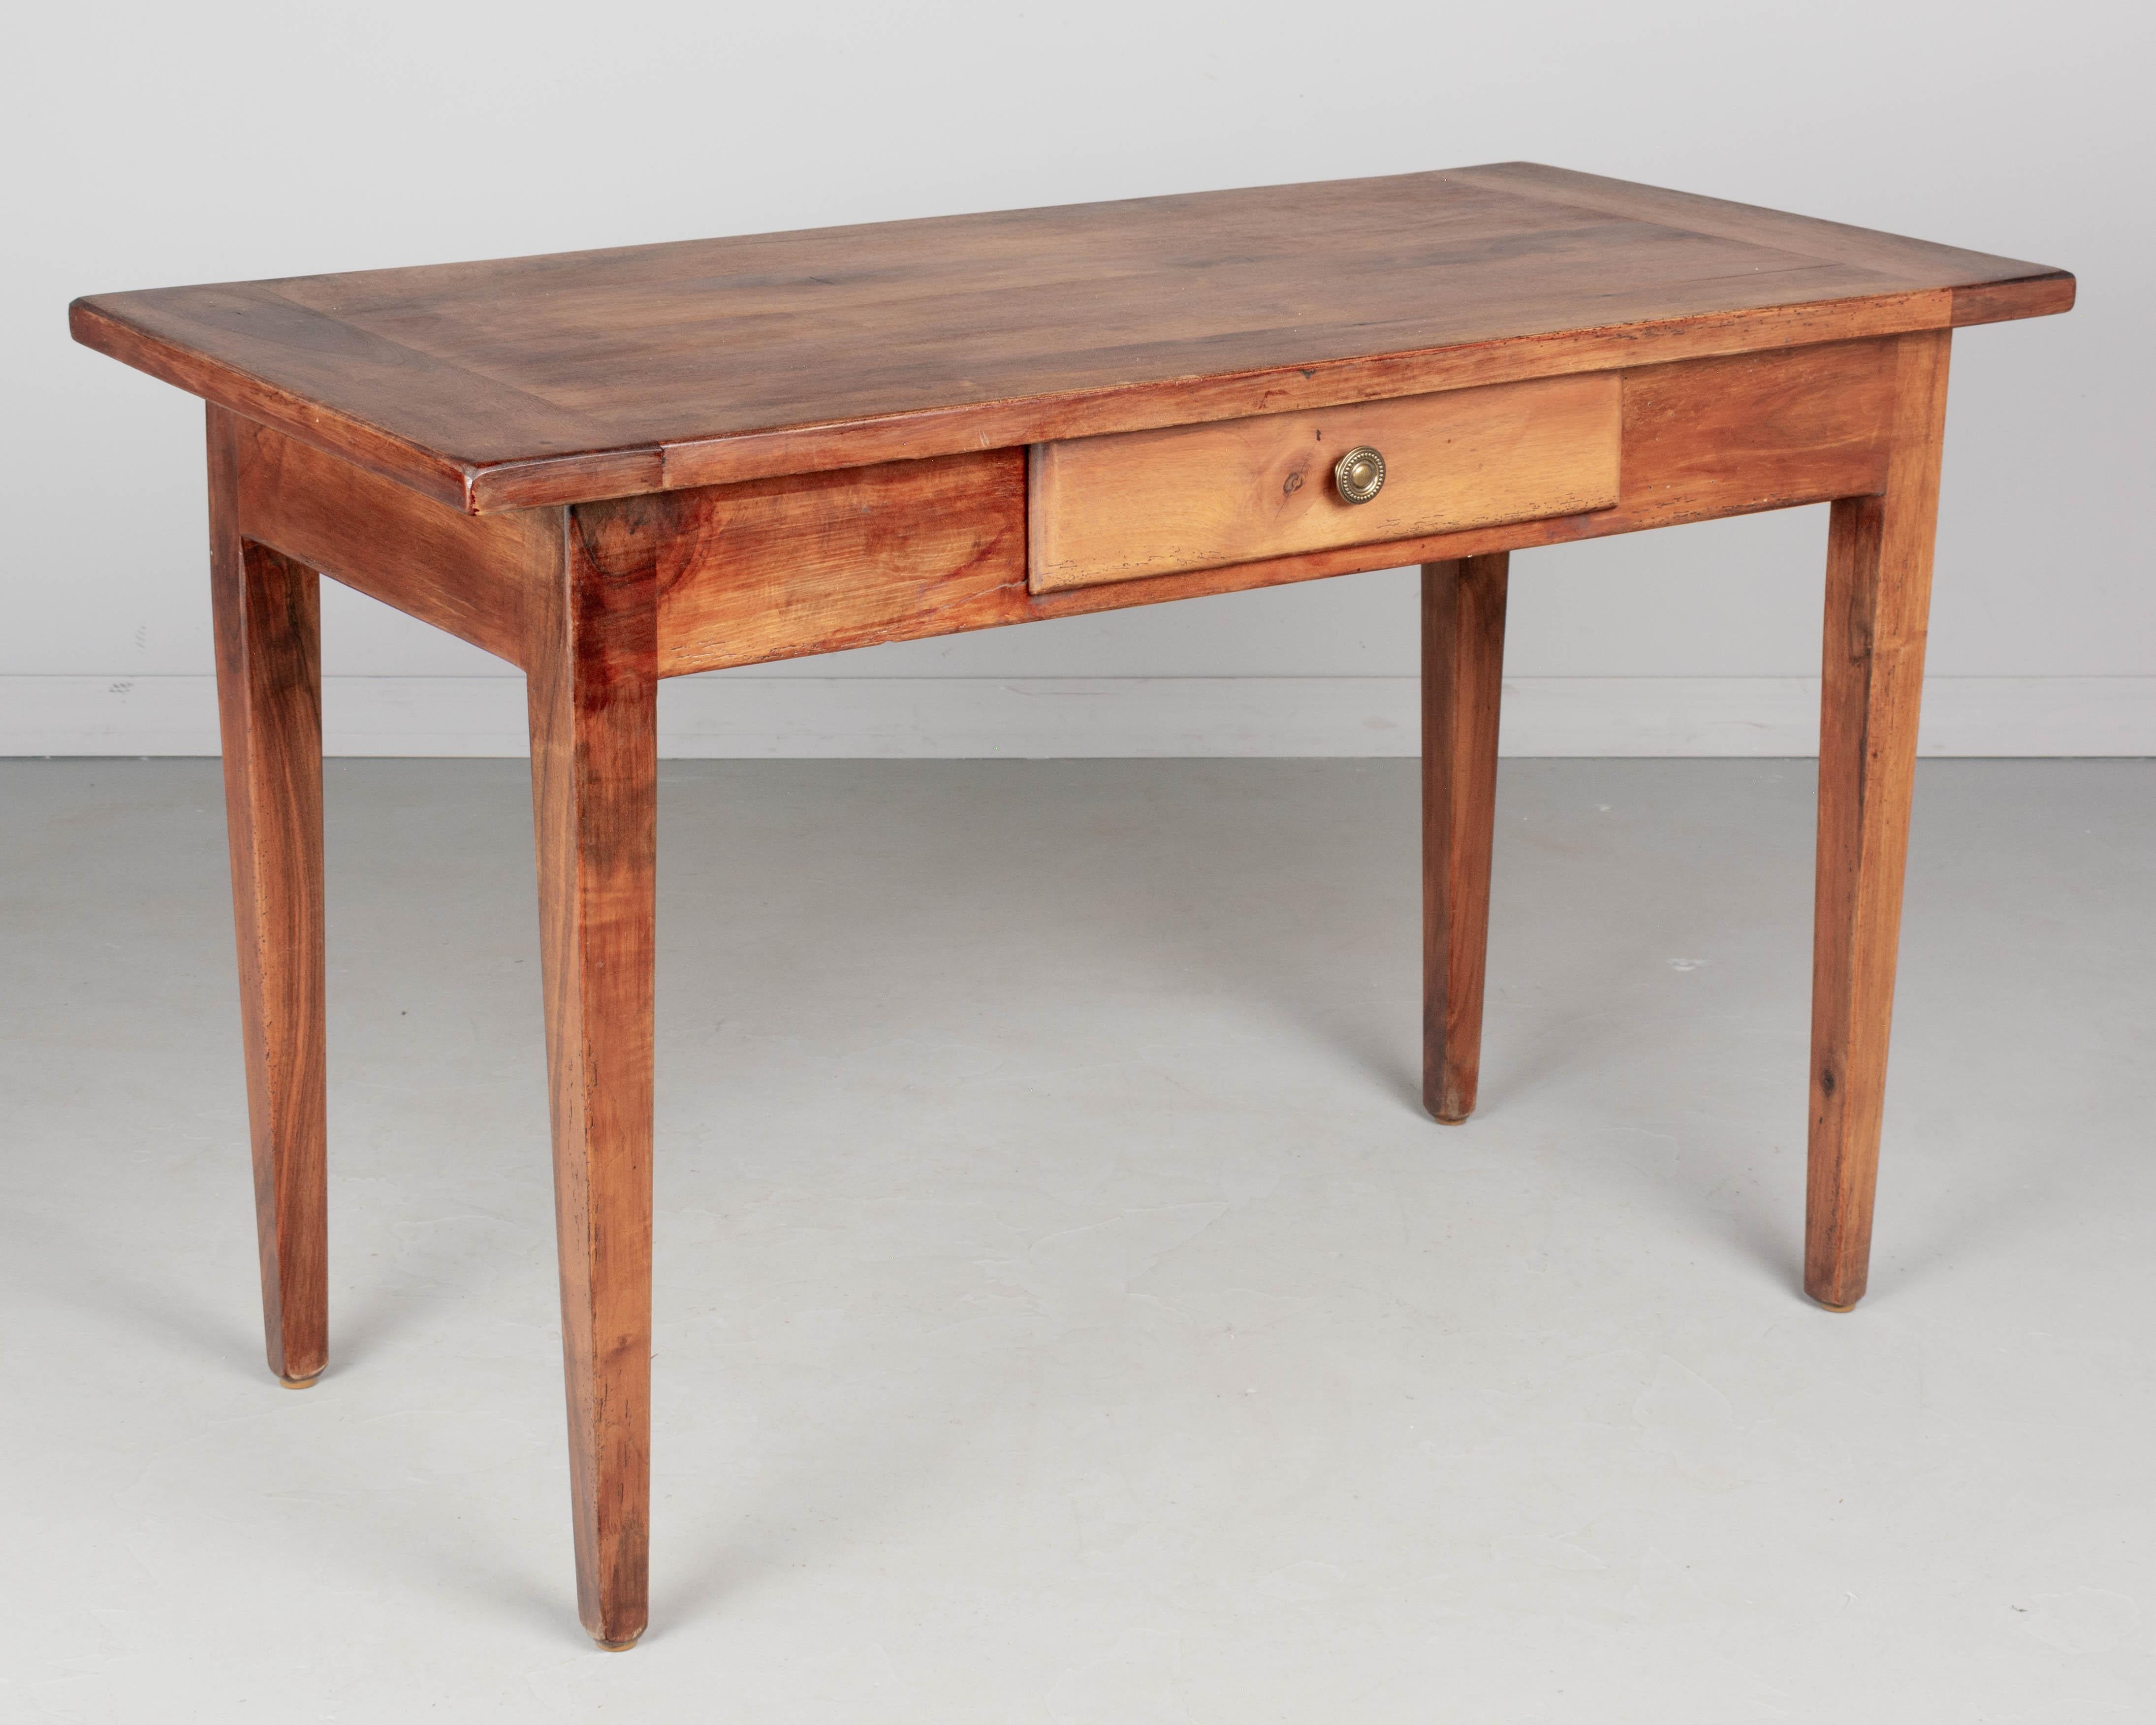 A small Country French farm table made of solid walnut with tapered legs and a dovetailed drawer with brass knob. Pegged construction. Waxed finish. A good sturdy table with normal wear for its age and use. Perfect for use as a desk. Circa